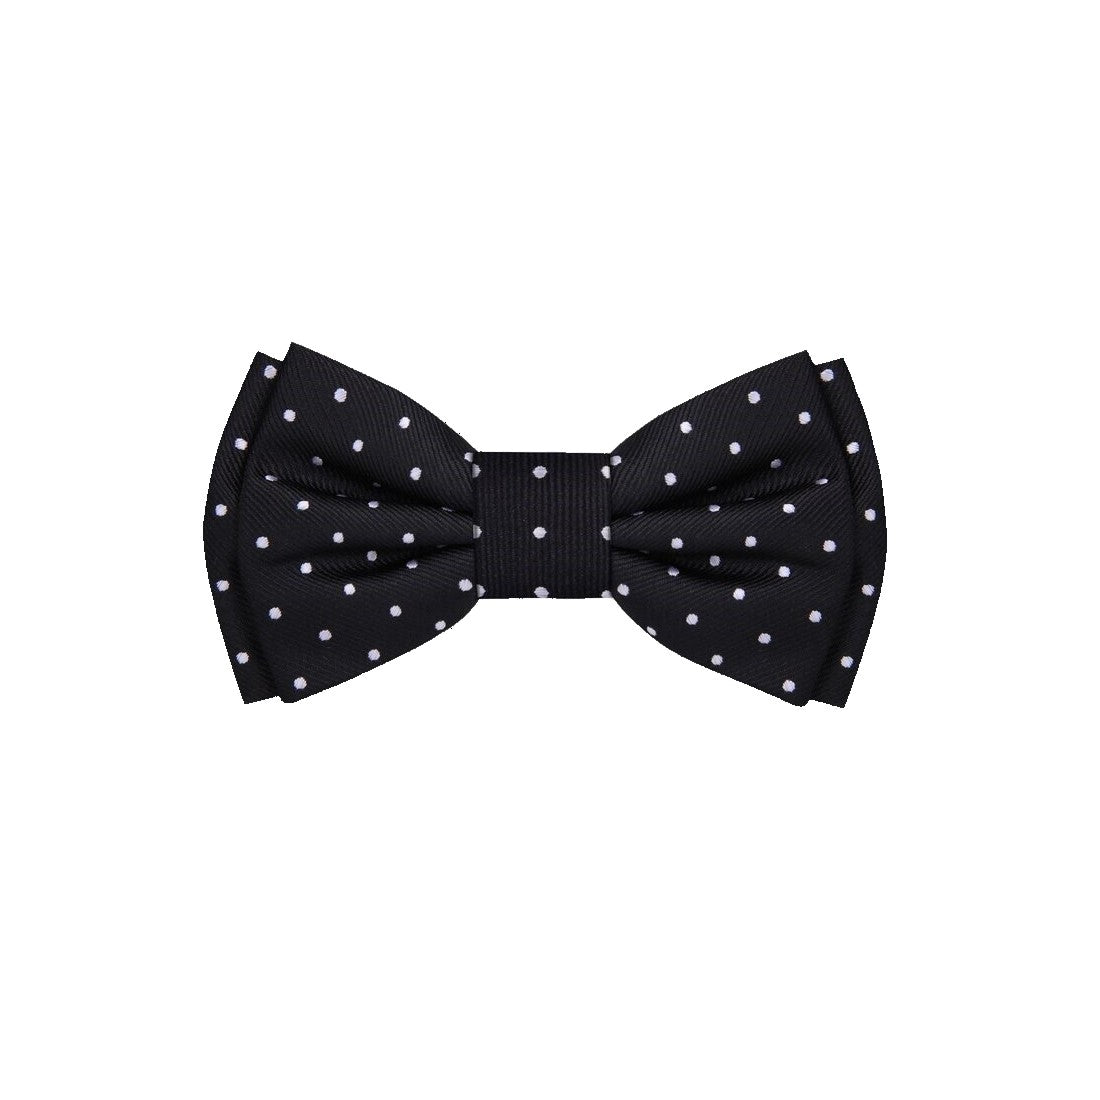 Black with Small White Dots Bow Tie 